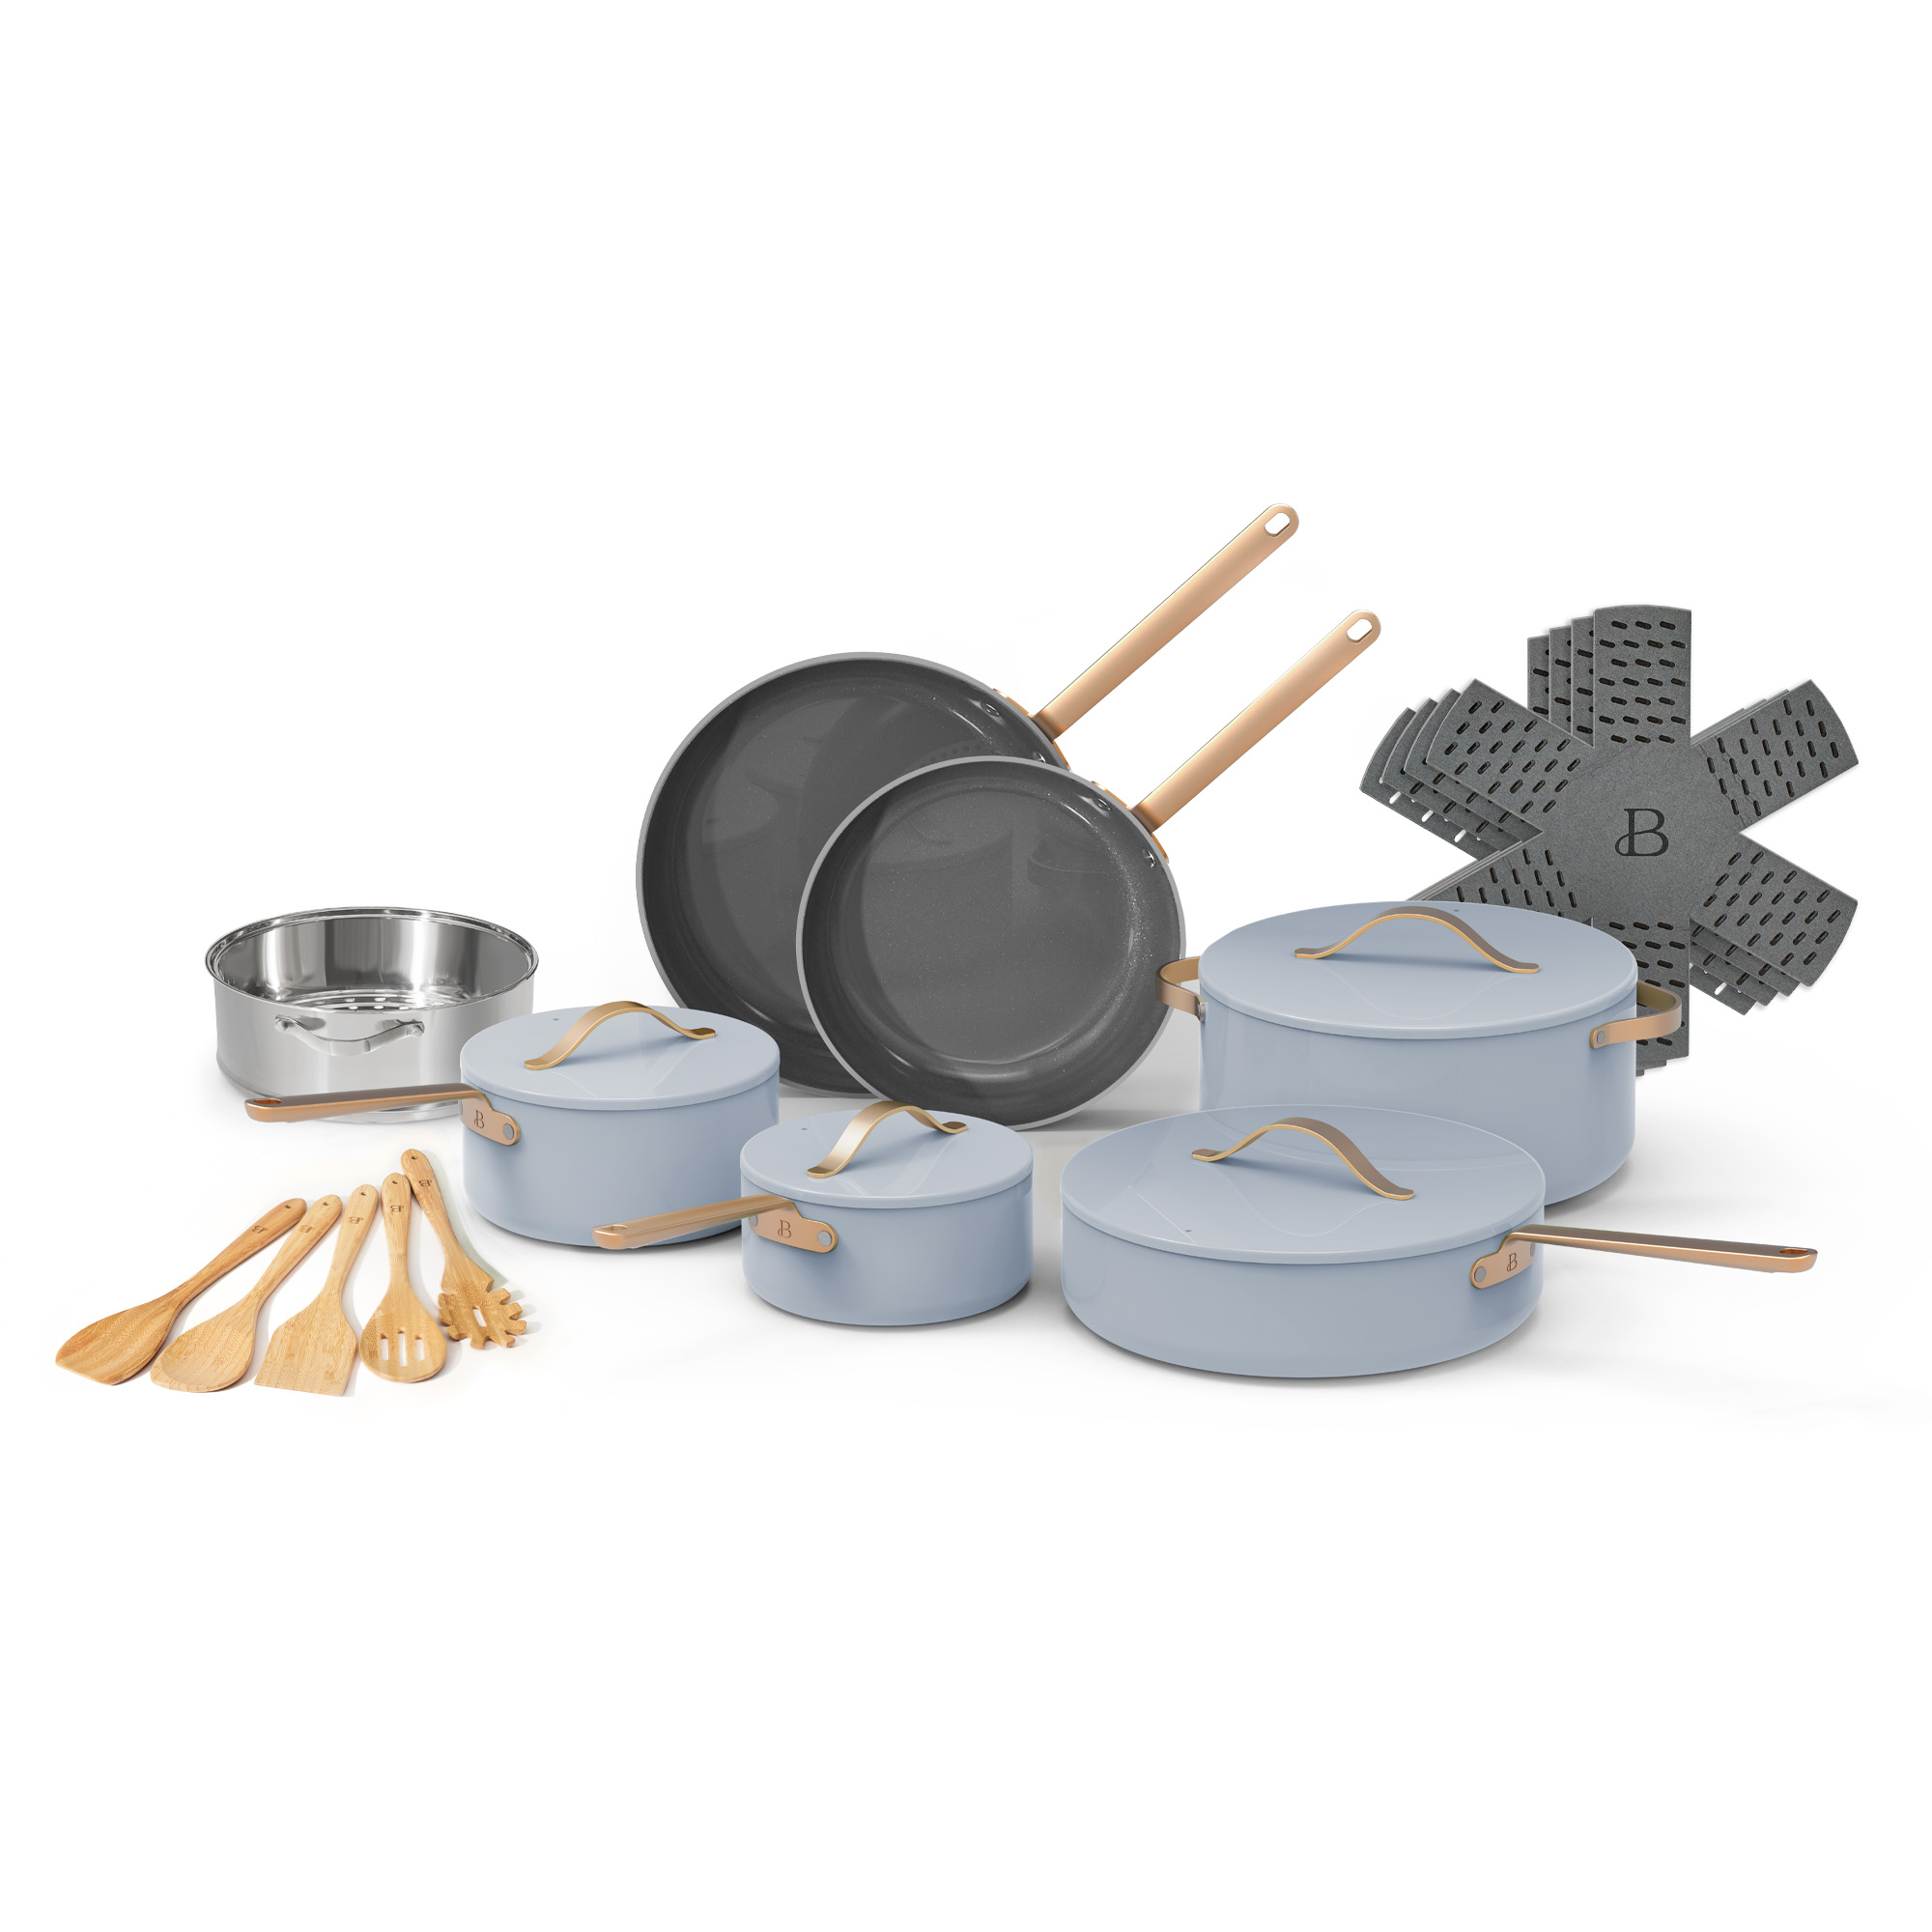 Beautiful 20pc Ceramic Non-Stick Cookware Set, Cornflower Blue by Drew Barrymore - image 7 of 7